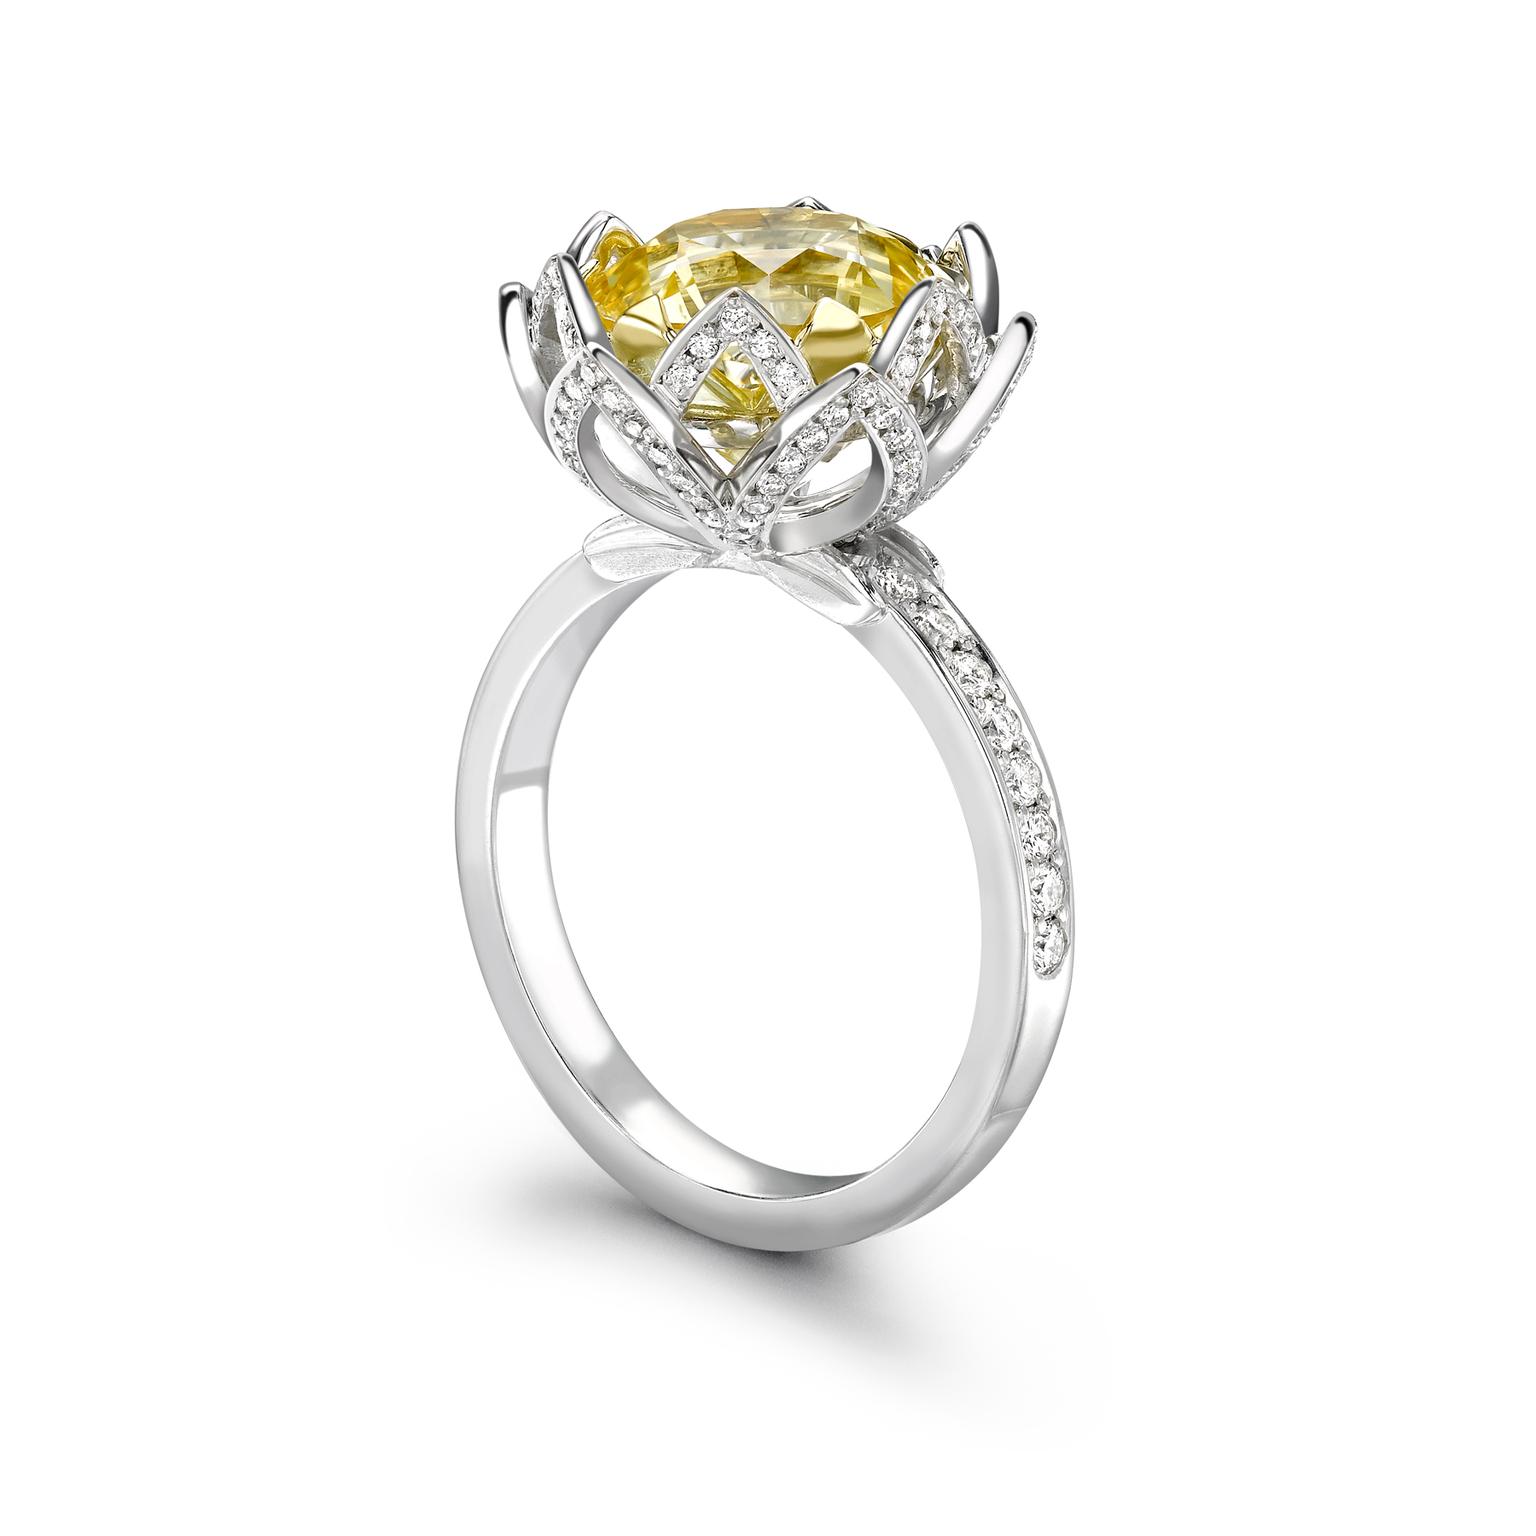 Theo Fennell yellow sapphire engagement ring